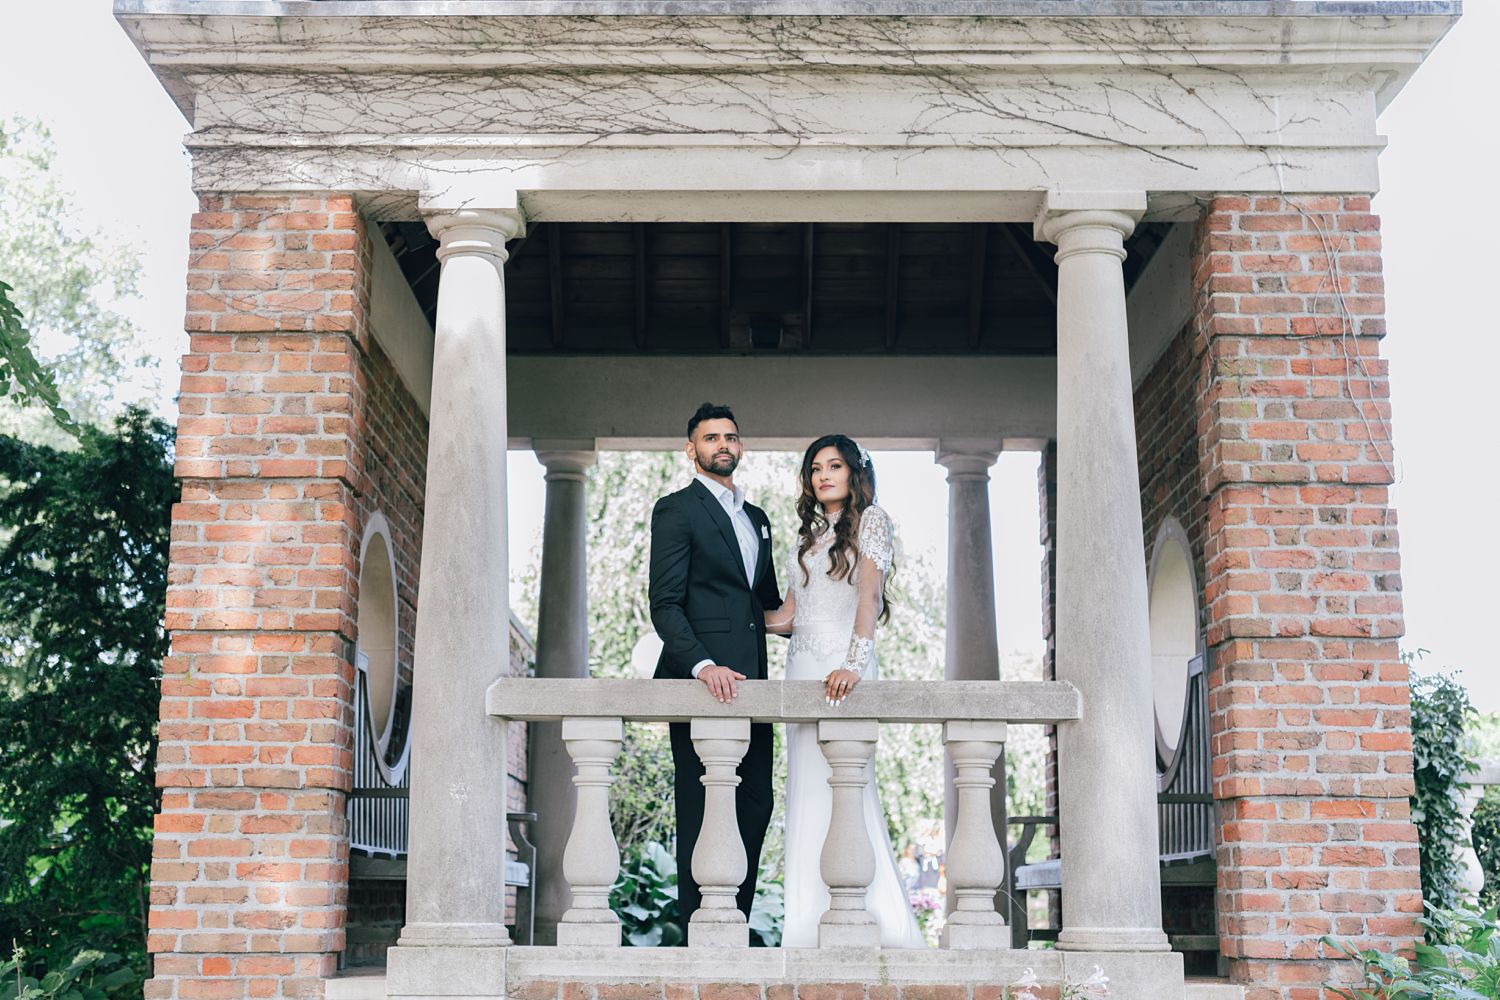 Wedding couple posing in archway at Chicago Botanic Garden for portrait